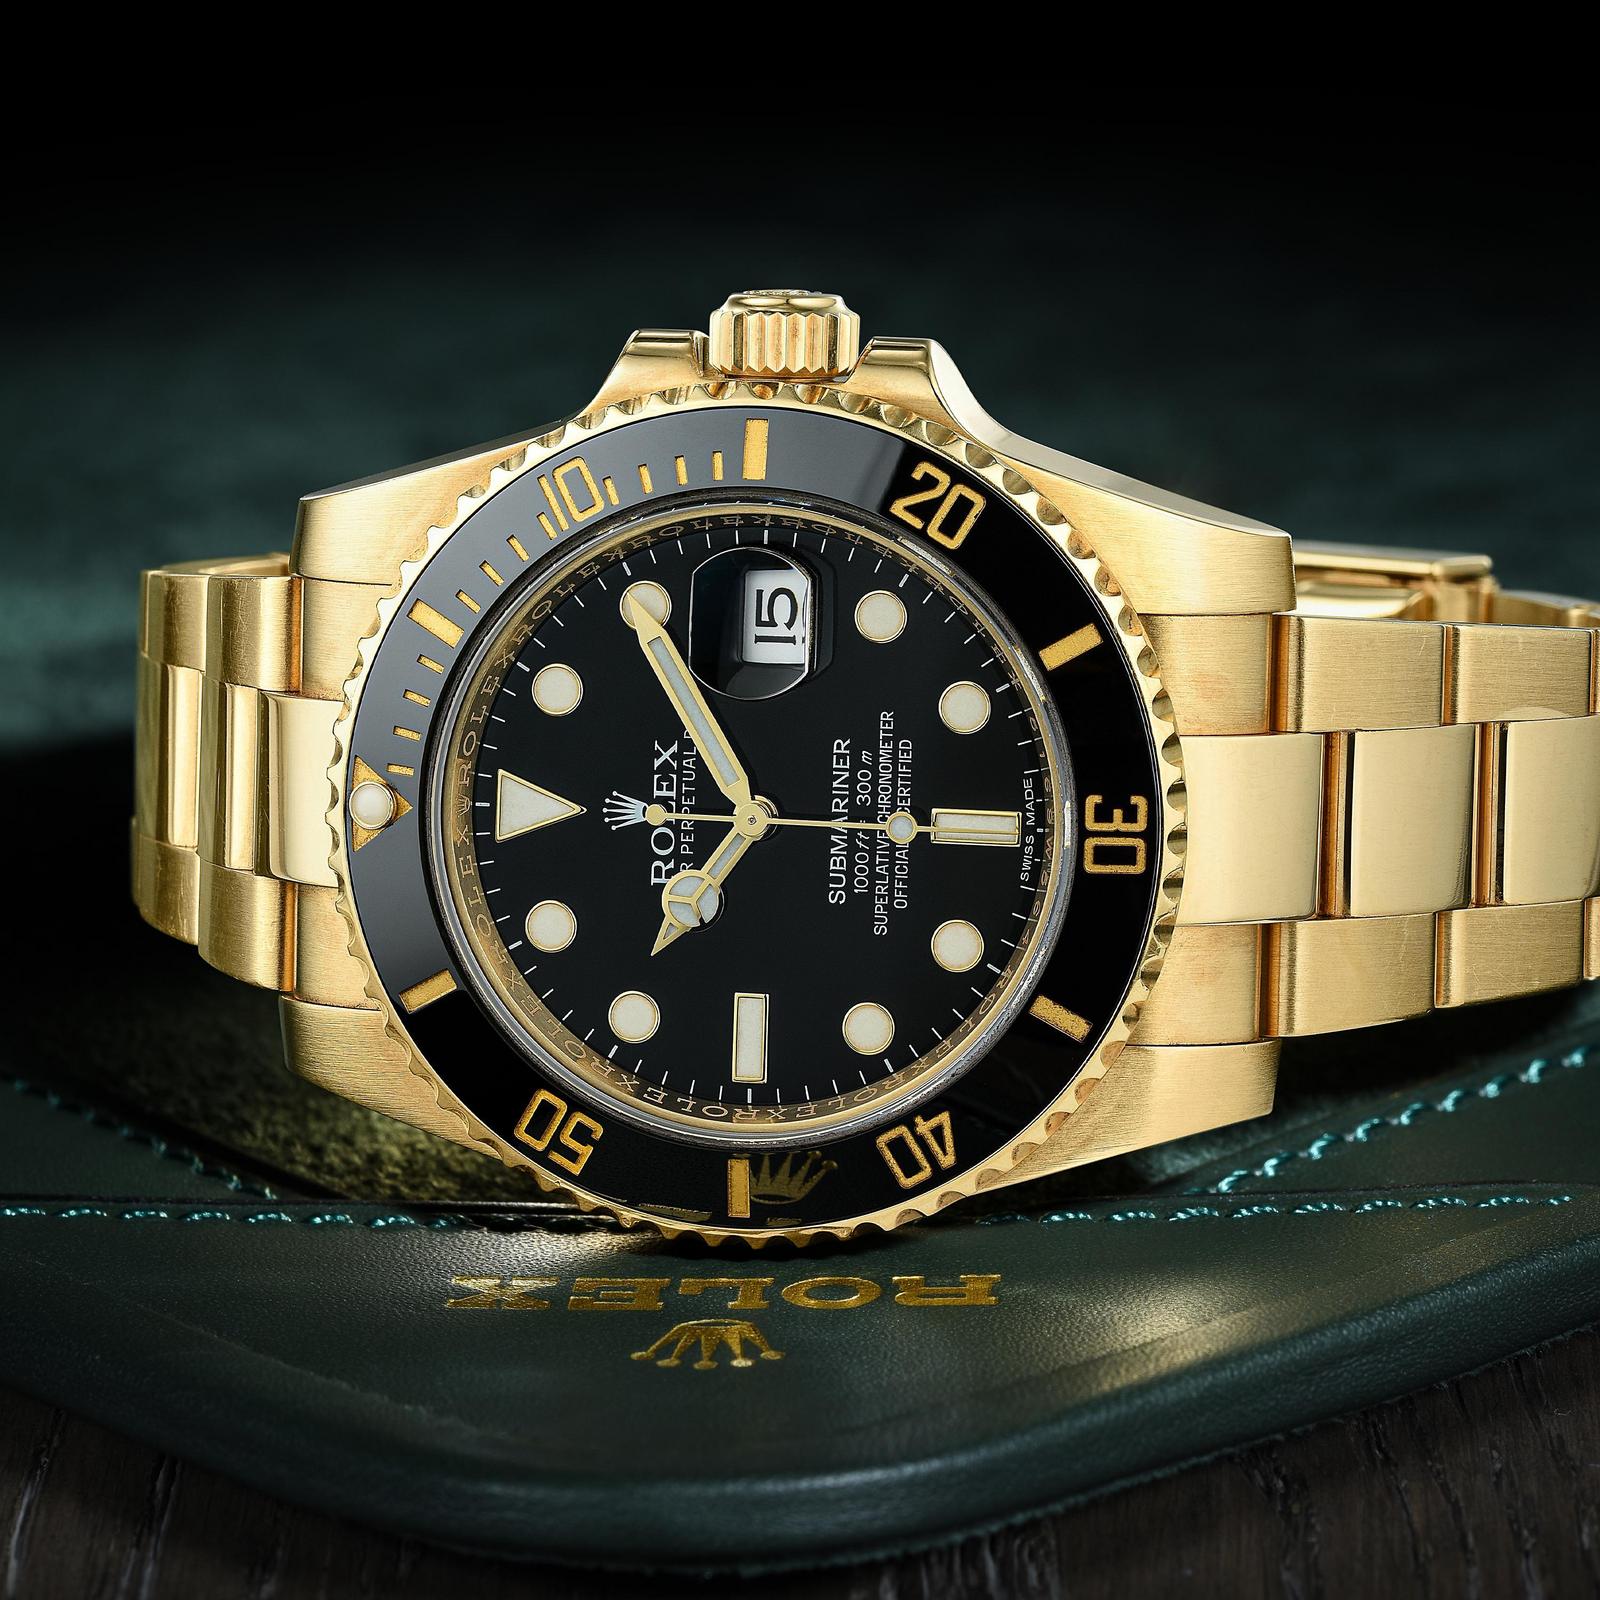 Submariner Date Ref. 116618 in Yellow Gold | Fortuna Fine Jewelry Auctions and